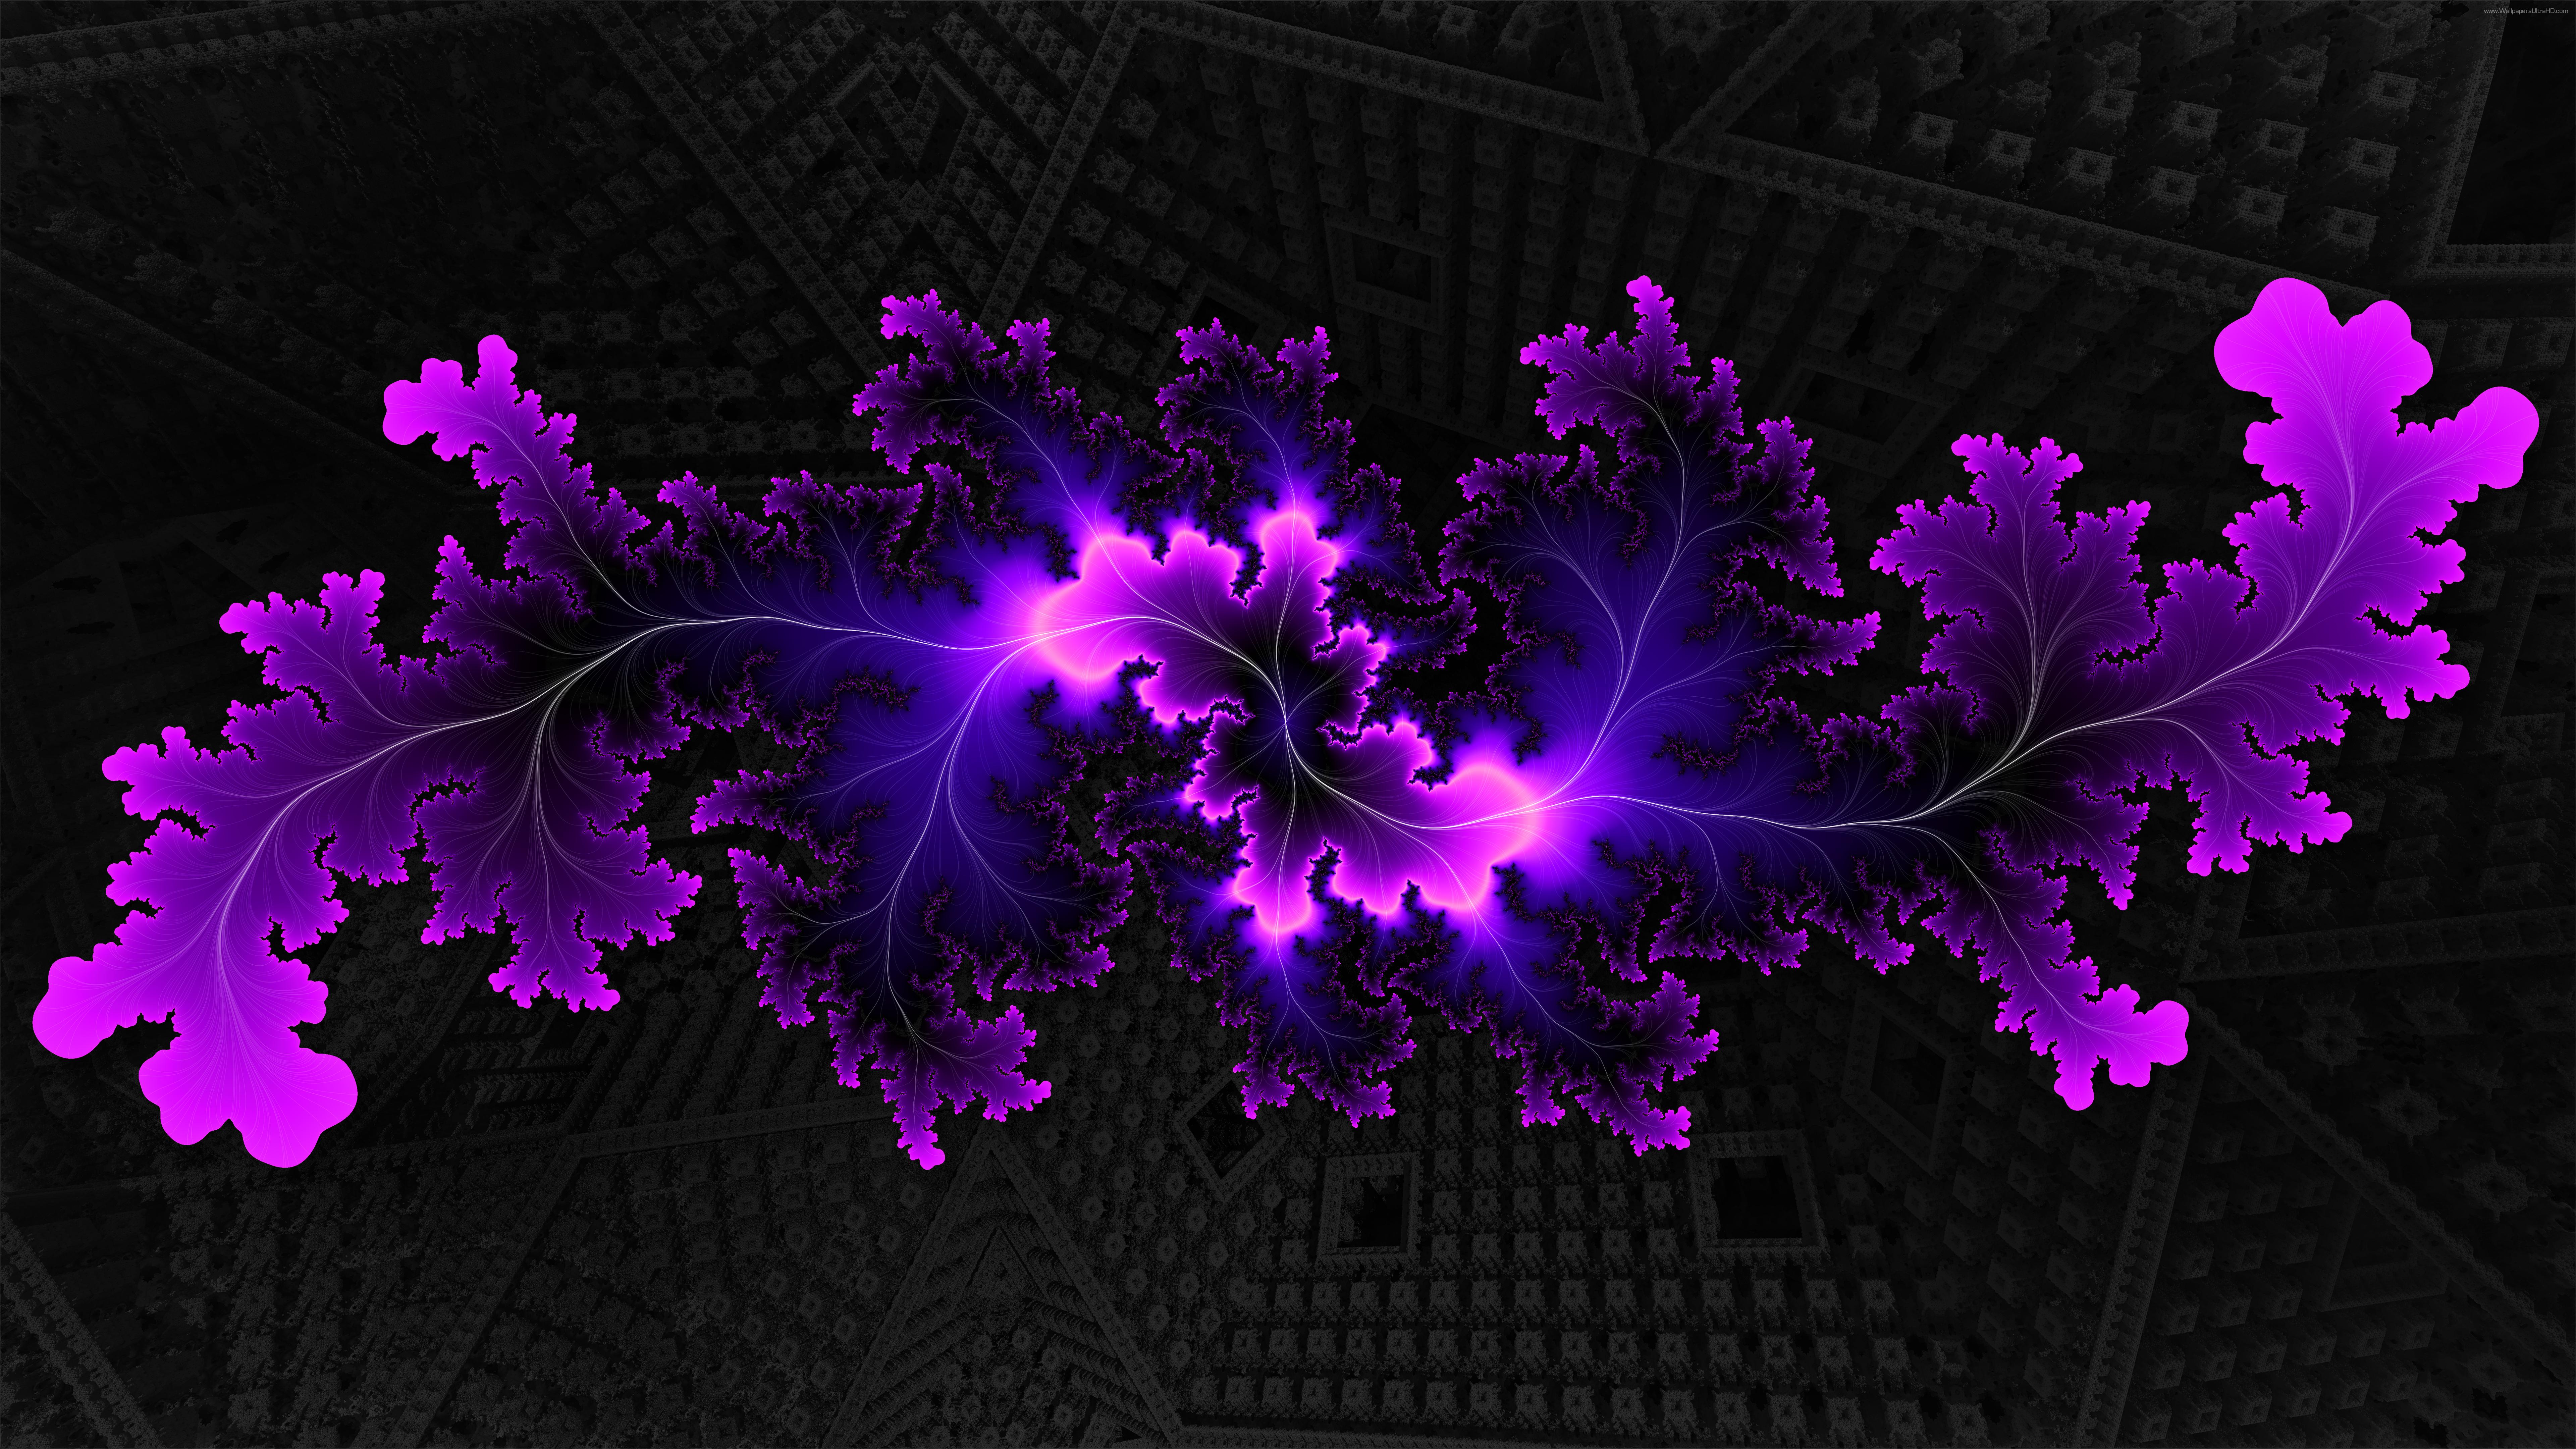 Wallpaper Purple Flower Petals on Black and White Textile, Background Free Image